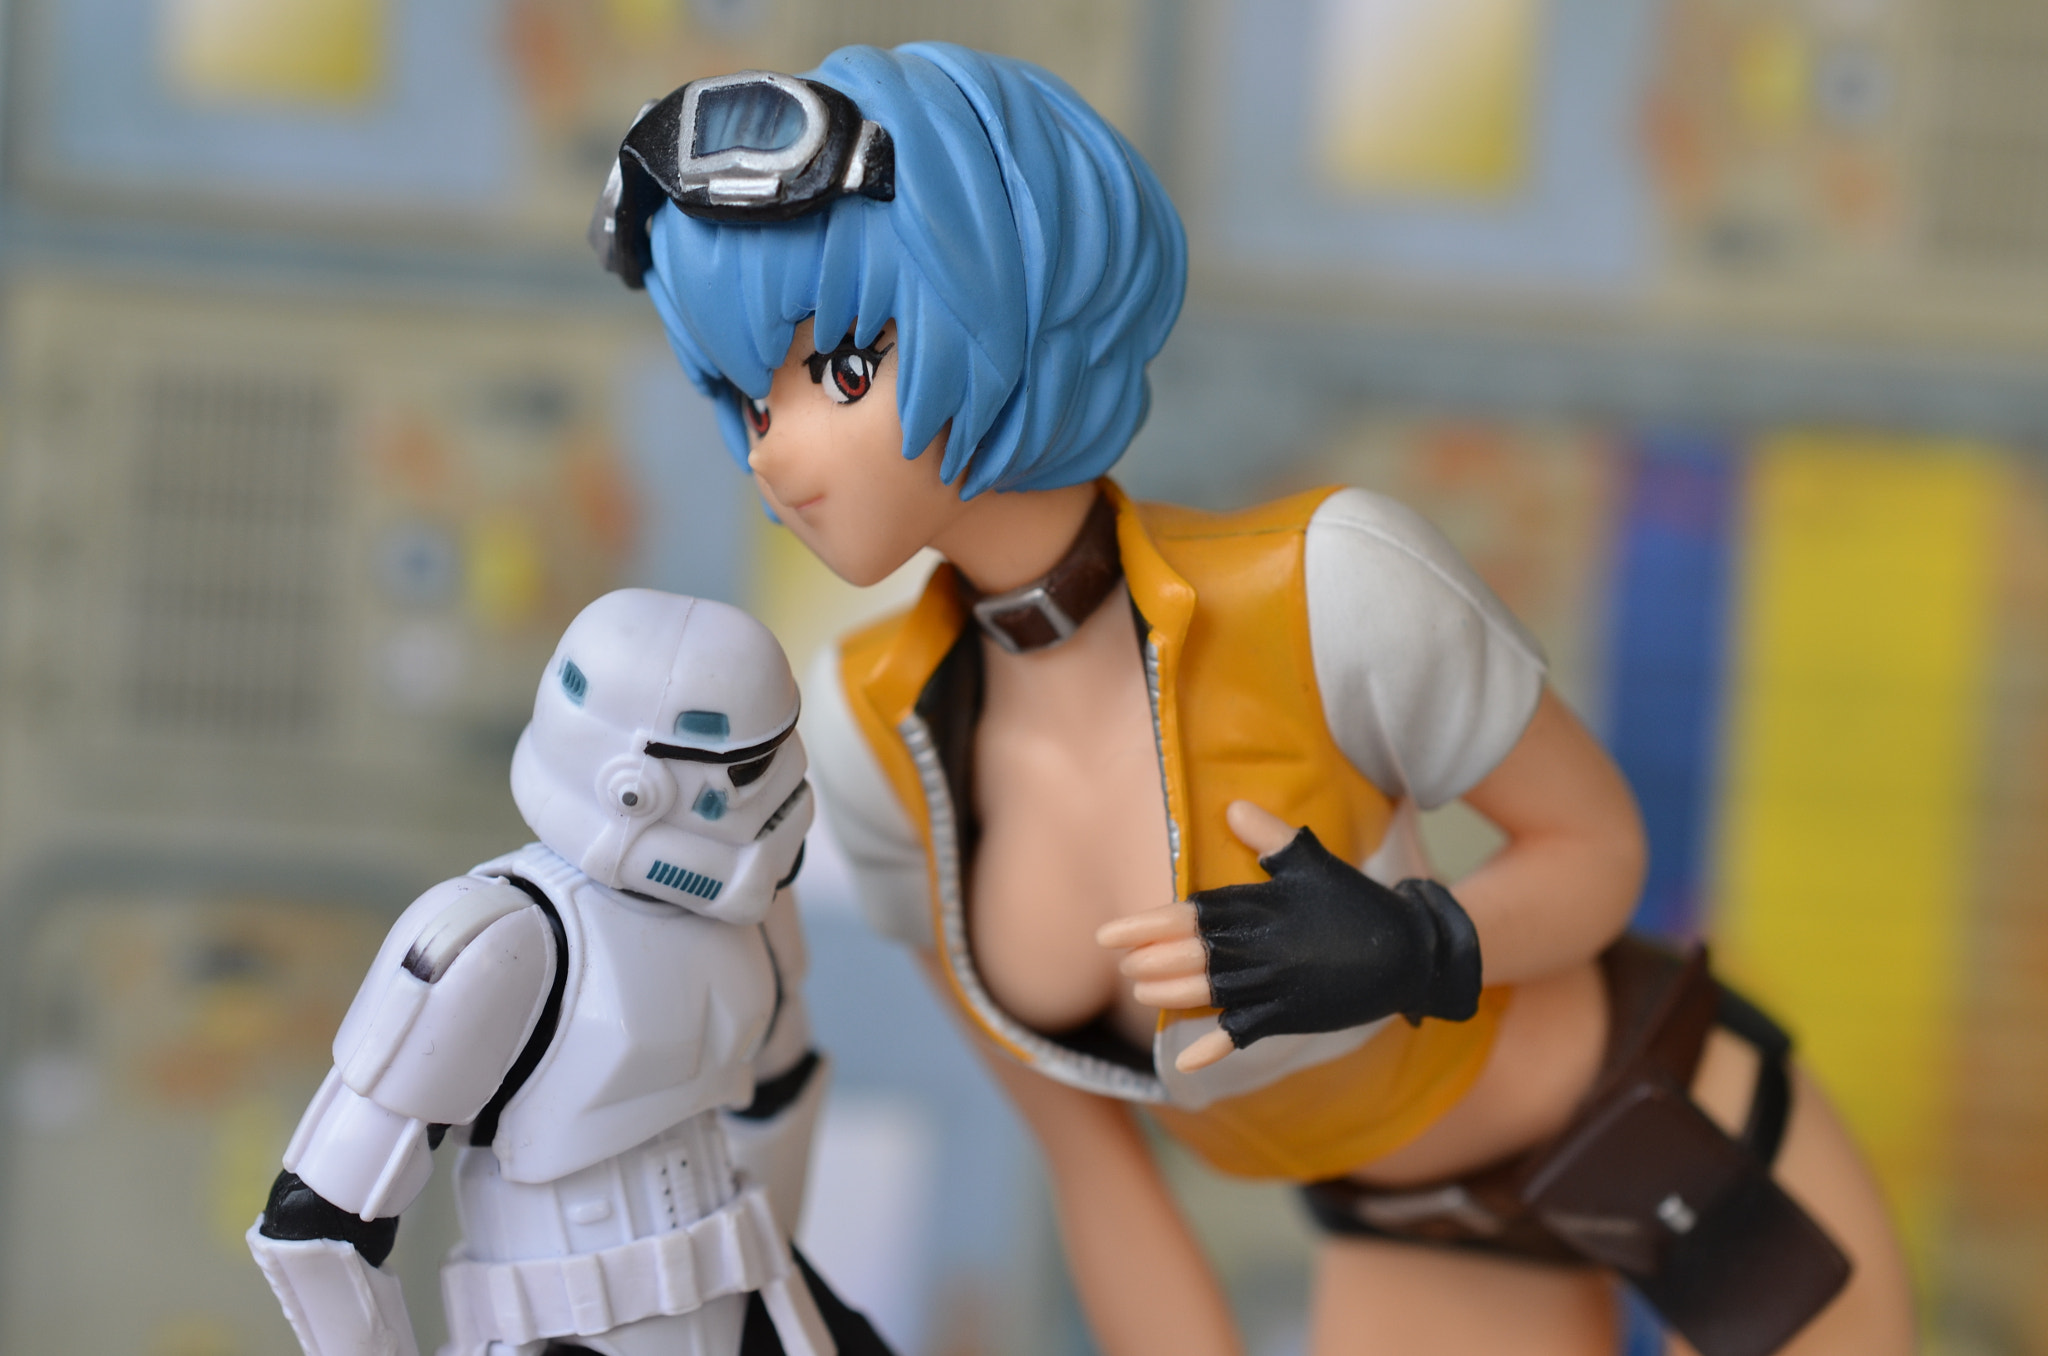 General 2048x1356 Star Wars humor toys action figures figurines boobs Imperial Stormtrooper movie characters closeup